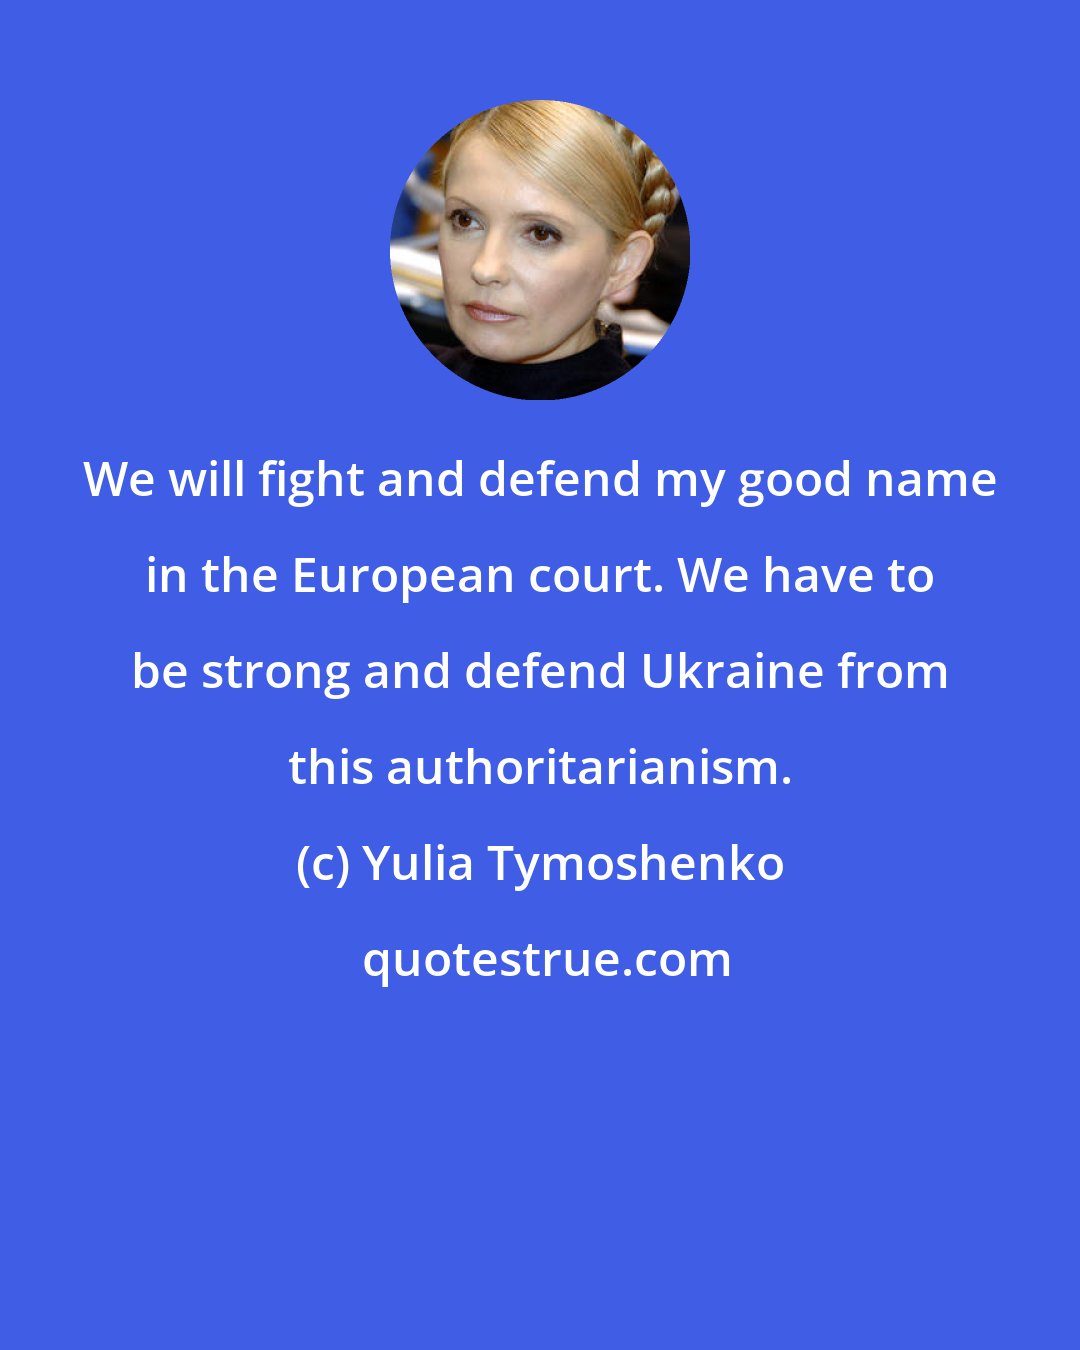 Yulia Tymoshenko: We will fight and defend my good name in the European court. We have to be strong and defend Ukraine from this authoritarianism.